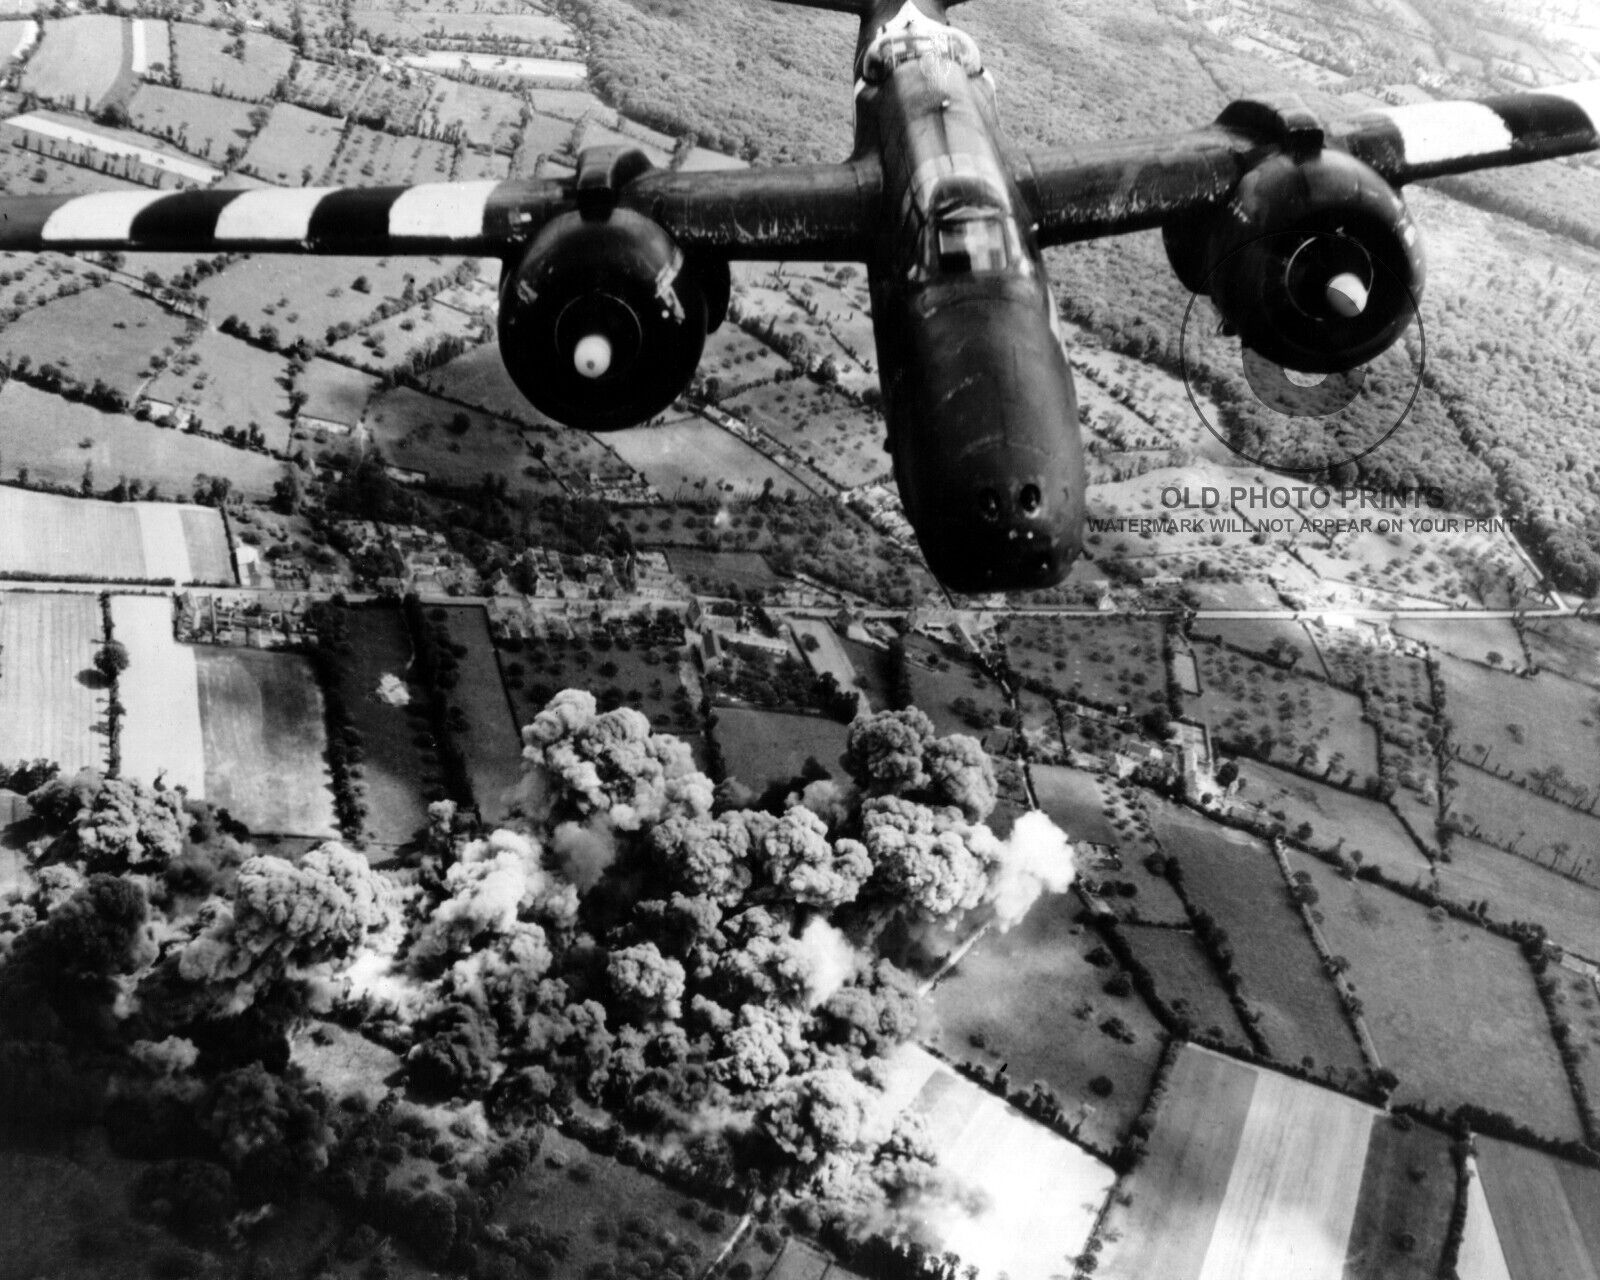 A-20 G Havoc Bomber 1942 Photograph WWII Over Littry, France 8X10 Photo Print